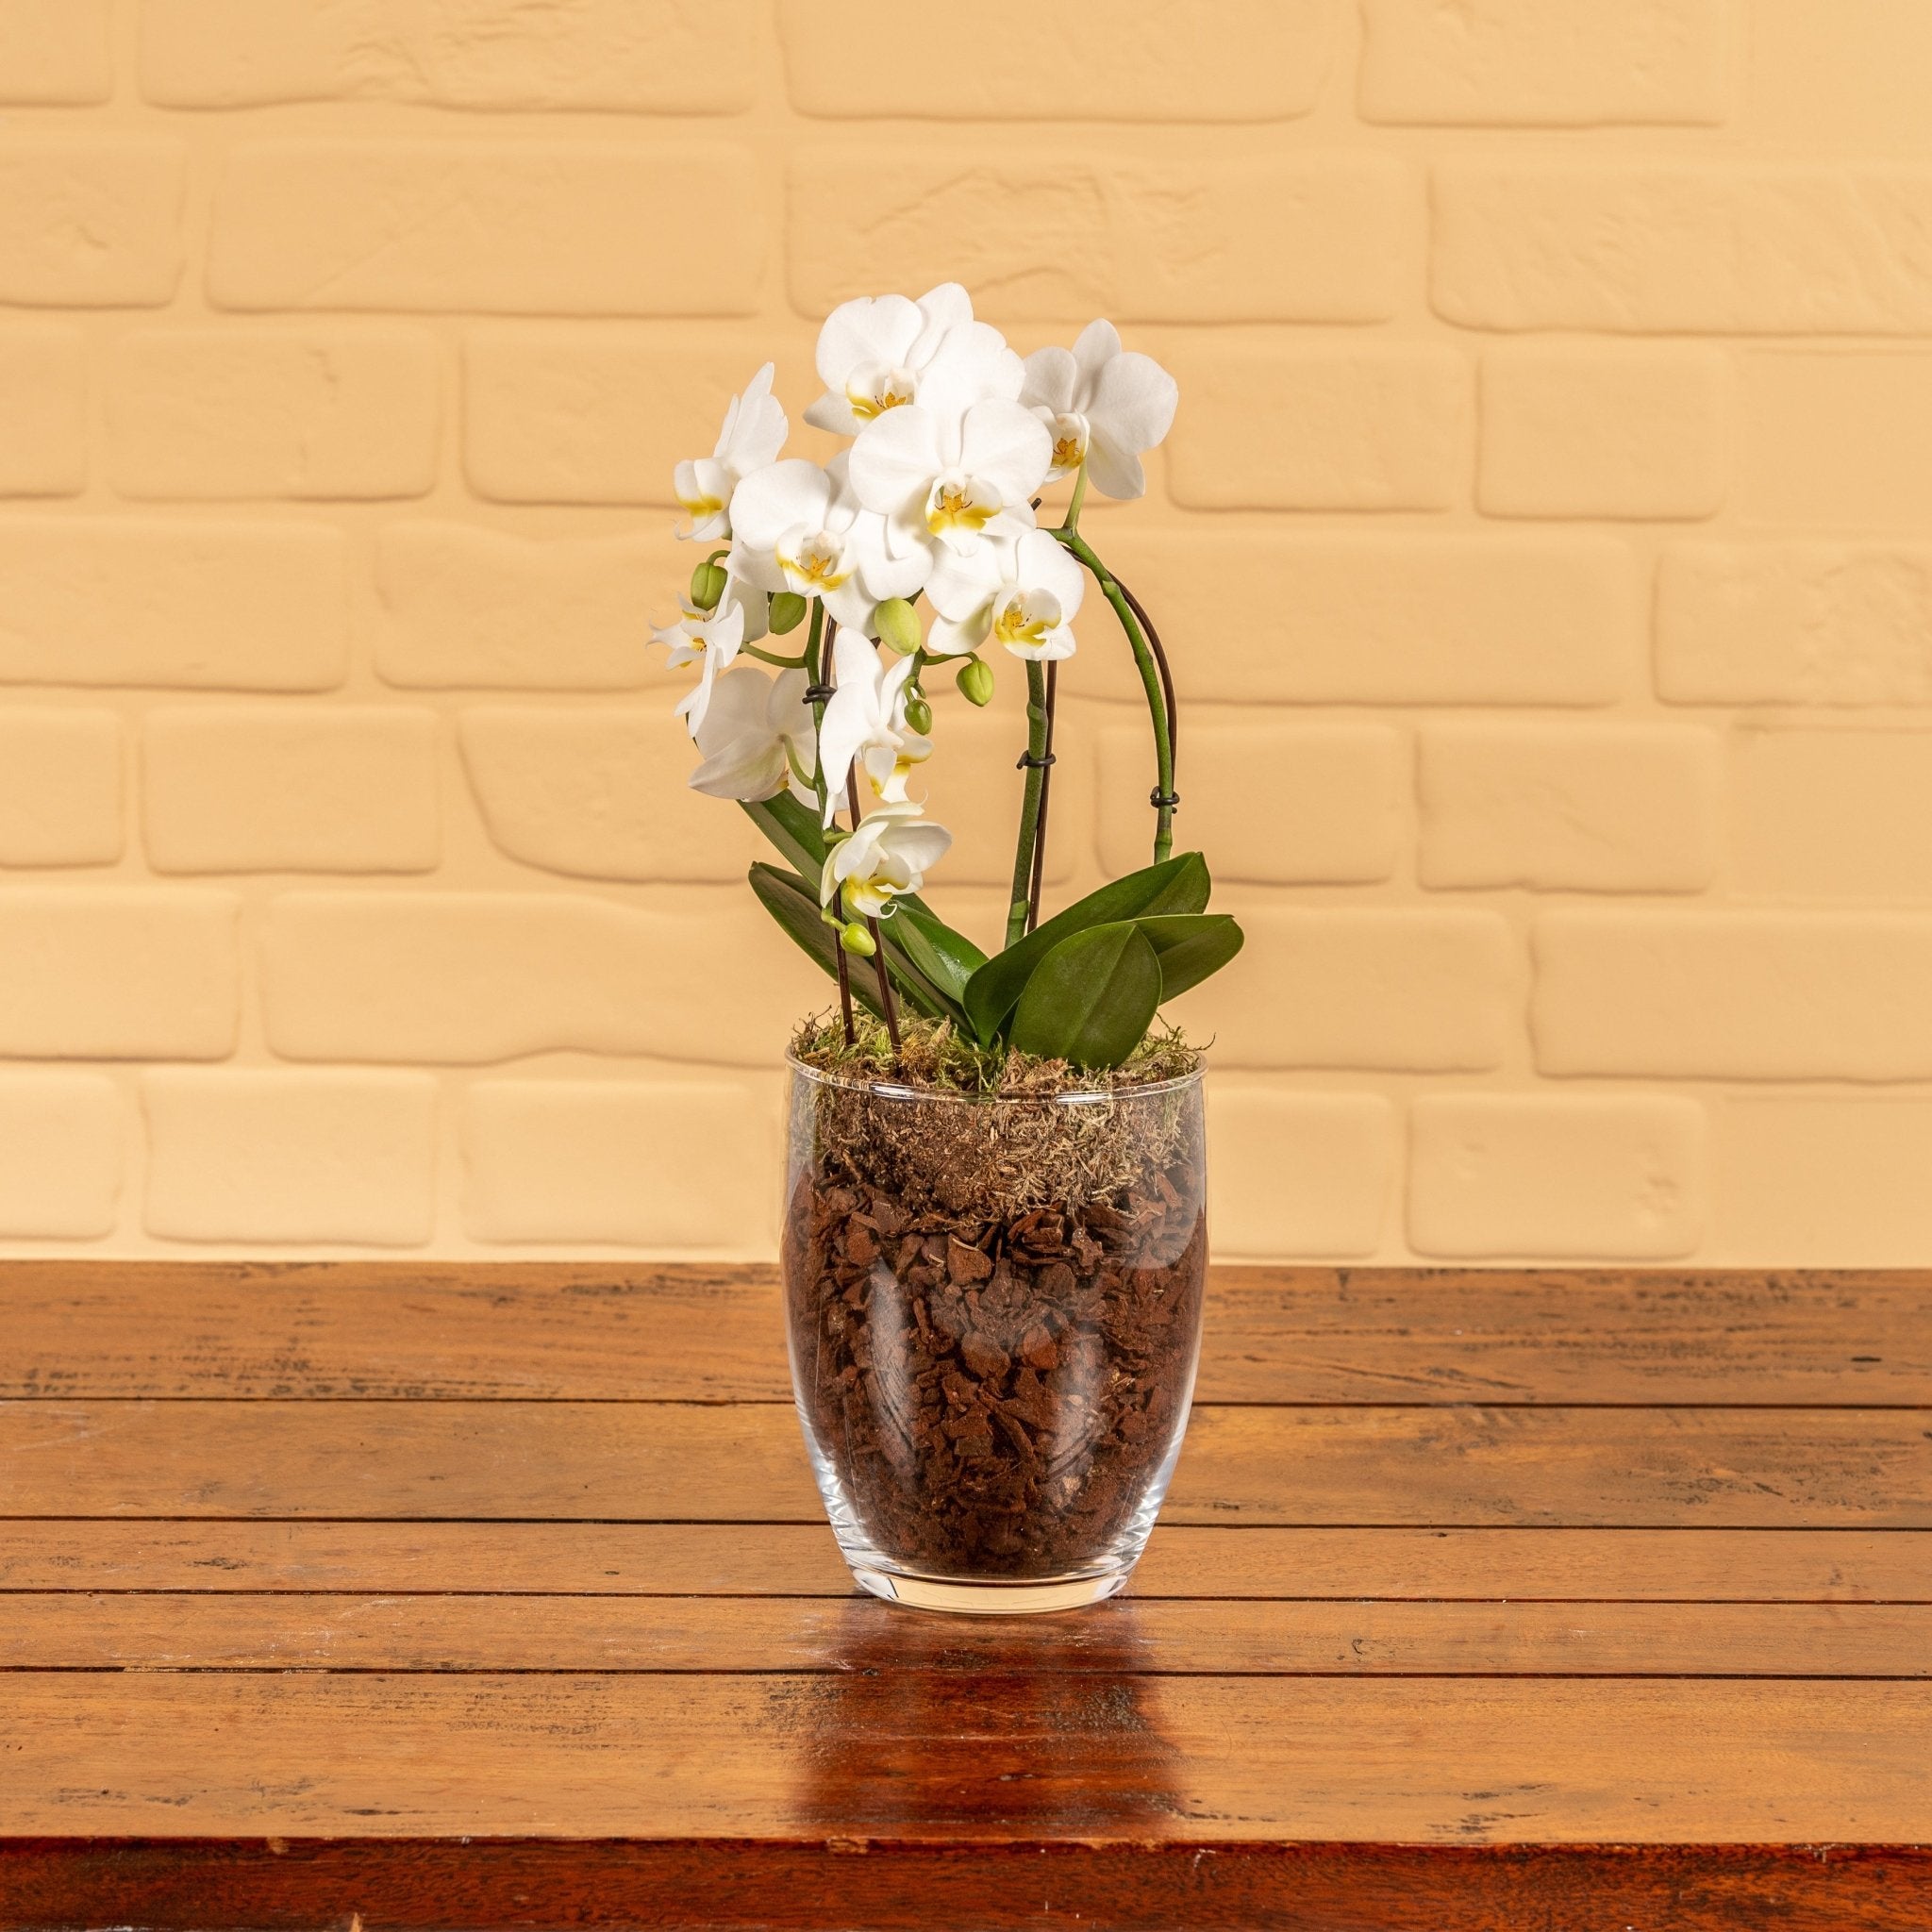 Hinton: Orchid in Glass pot - Love Orchids